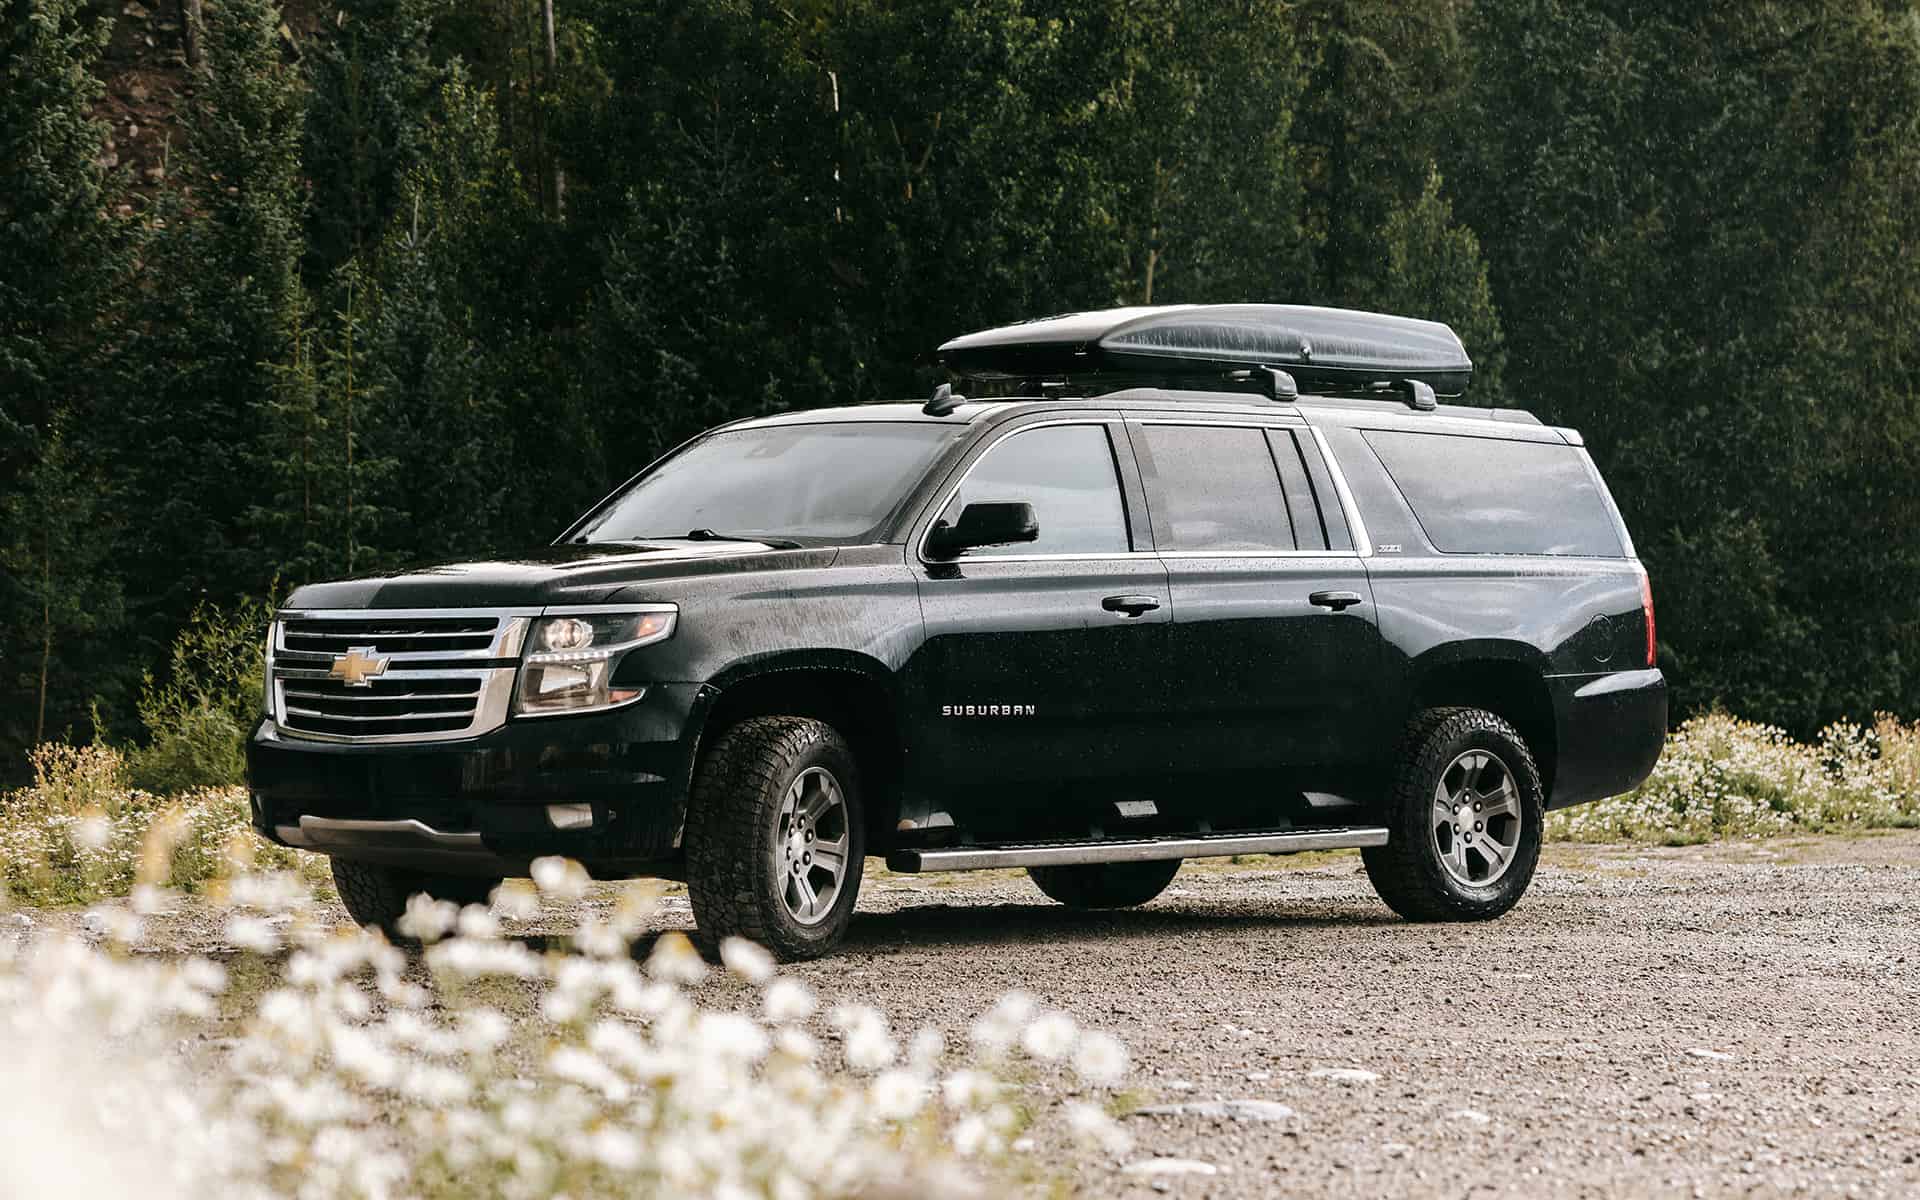 Black SUV in the mountains